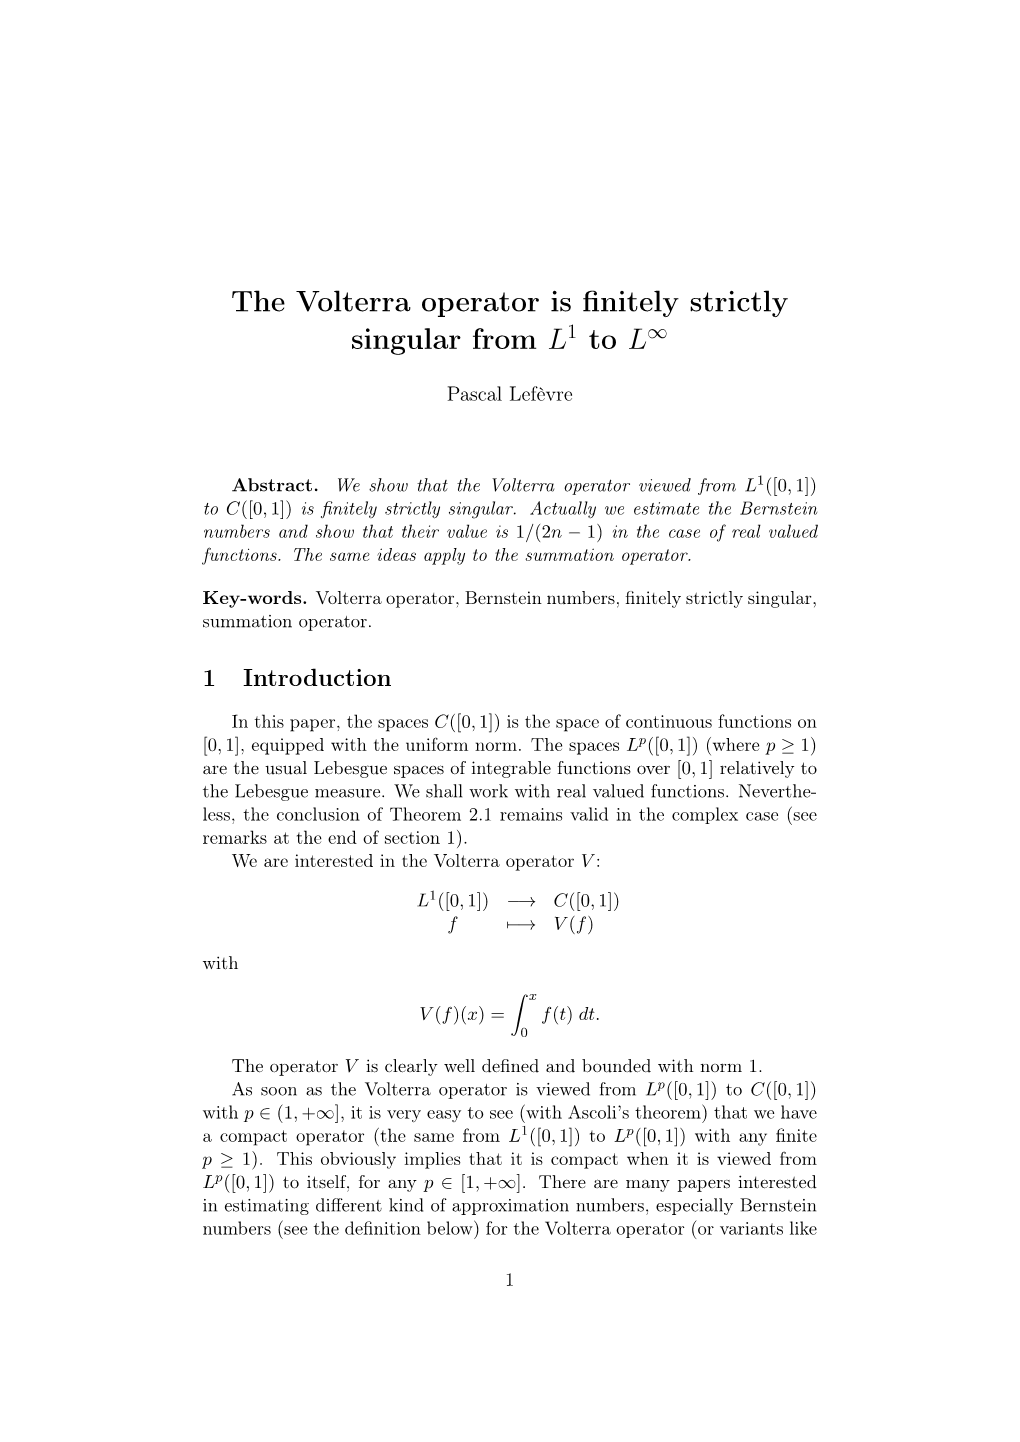 The Volterra Operator Is Finitely Strictly Singular from L1 to L